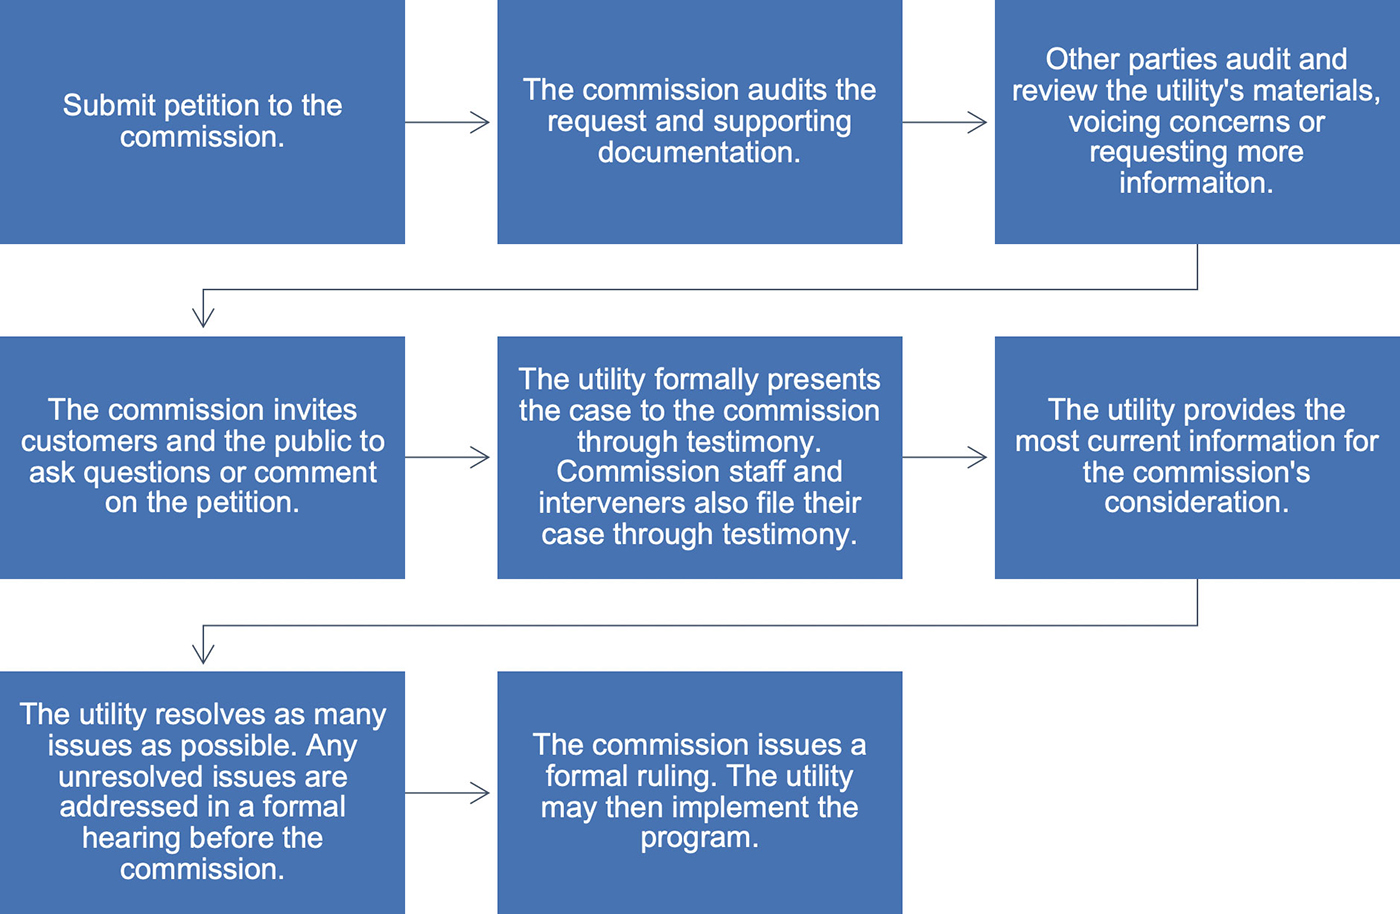 Process diagram with eight steps. Step 1: Submit petition to the commission. Step 2: The commission audits the request and supporting documentation. Step 3: Other parties audit and review the utility's materials, voicing concerns or requesting more information. Step 4: The commission invites customers and the public to ask questions or comment on the petition. Step 5: The utility formally presents the case to the commission through testimony. Commission staff and interveners also file their case through testimony. Step 6: The utility provides the most current information for the commission's consideration. Step 7: The utility resolves as many issues as possible. Any unresolved issues are addressed in a formal hearing before the commission. Step 8: The commission issues a formal ruling. The utility may then implement the program.